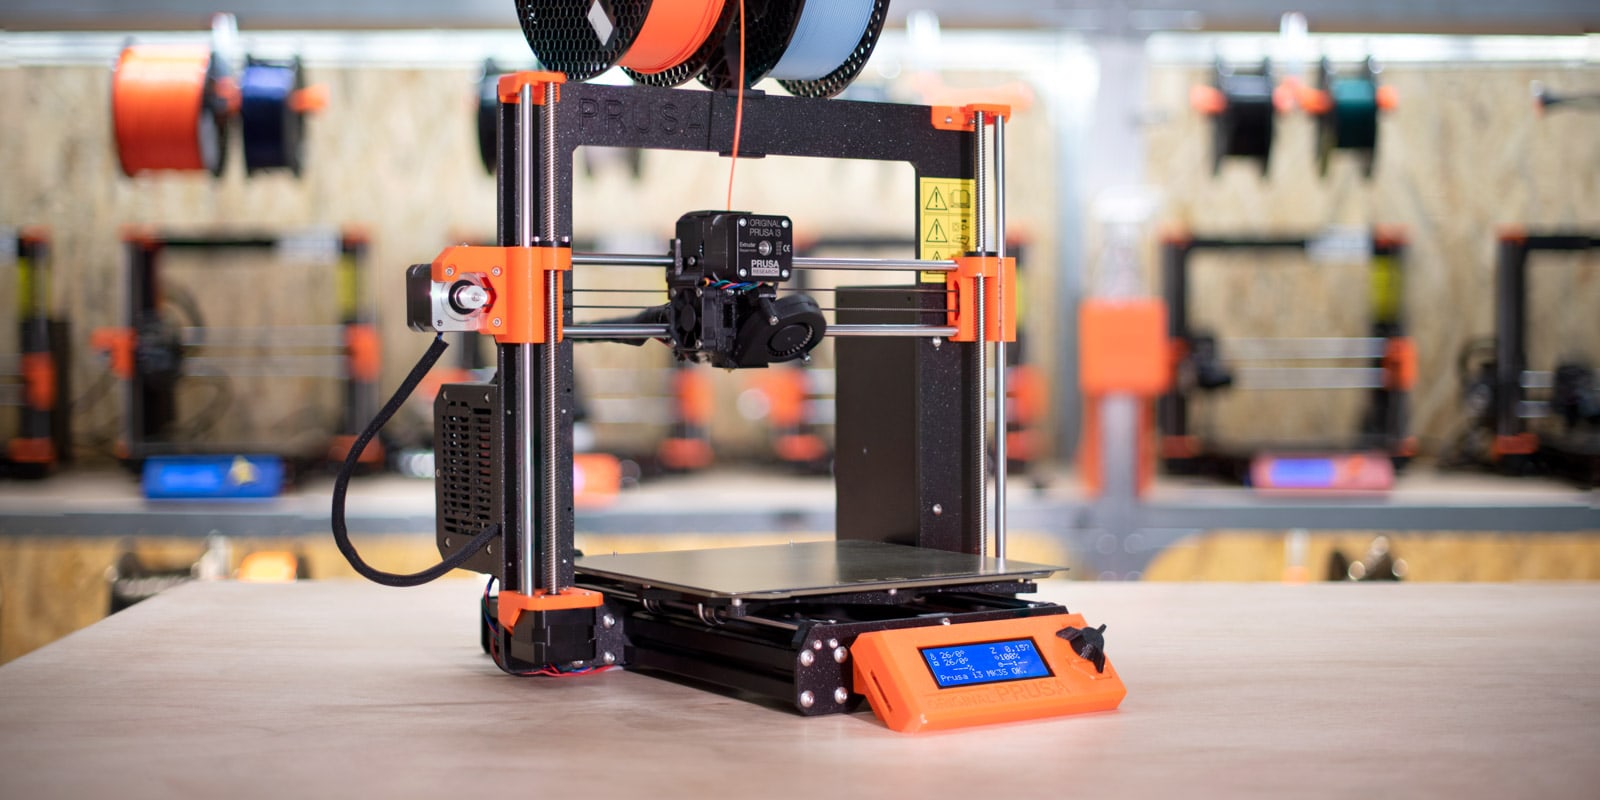 Actuator Wat is er mis familie The 10 Best 3D Printer for Under $1000 in 2023 | Linquip